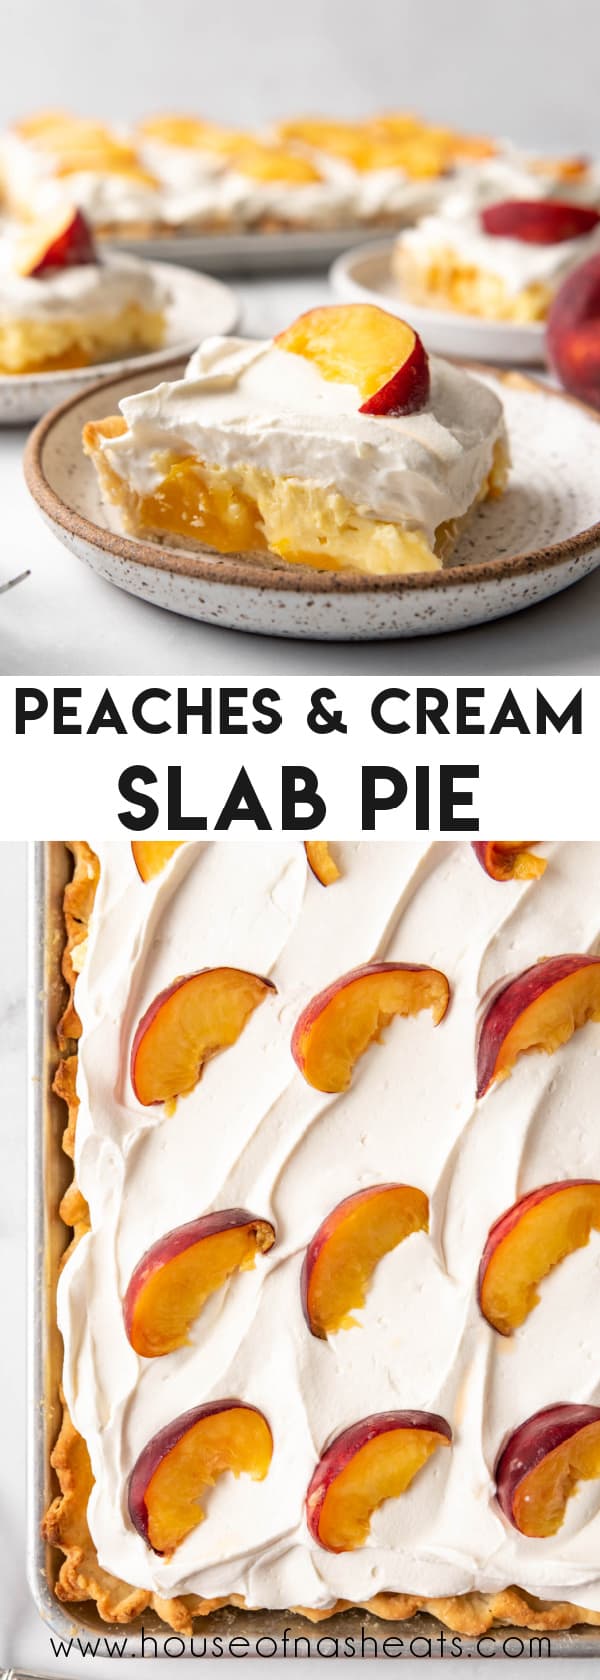 A collage of images of peaches & cream slab pie with text overlay.